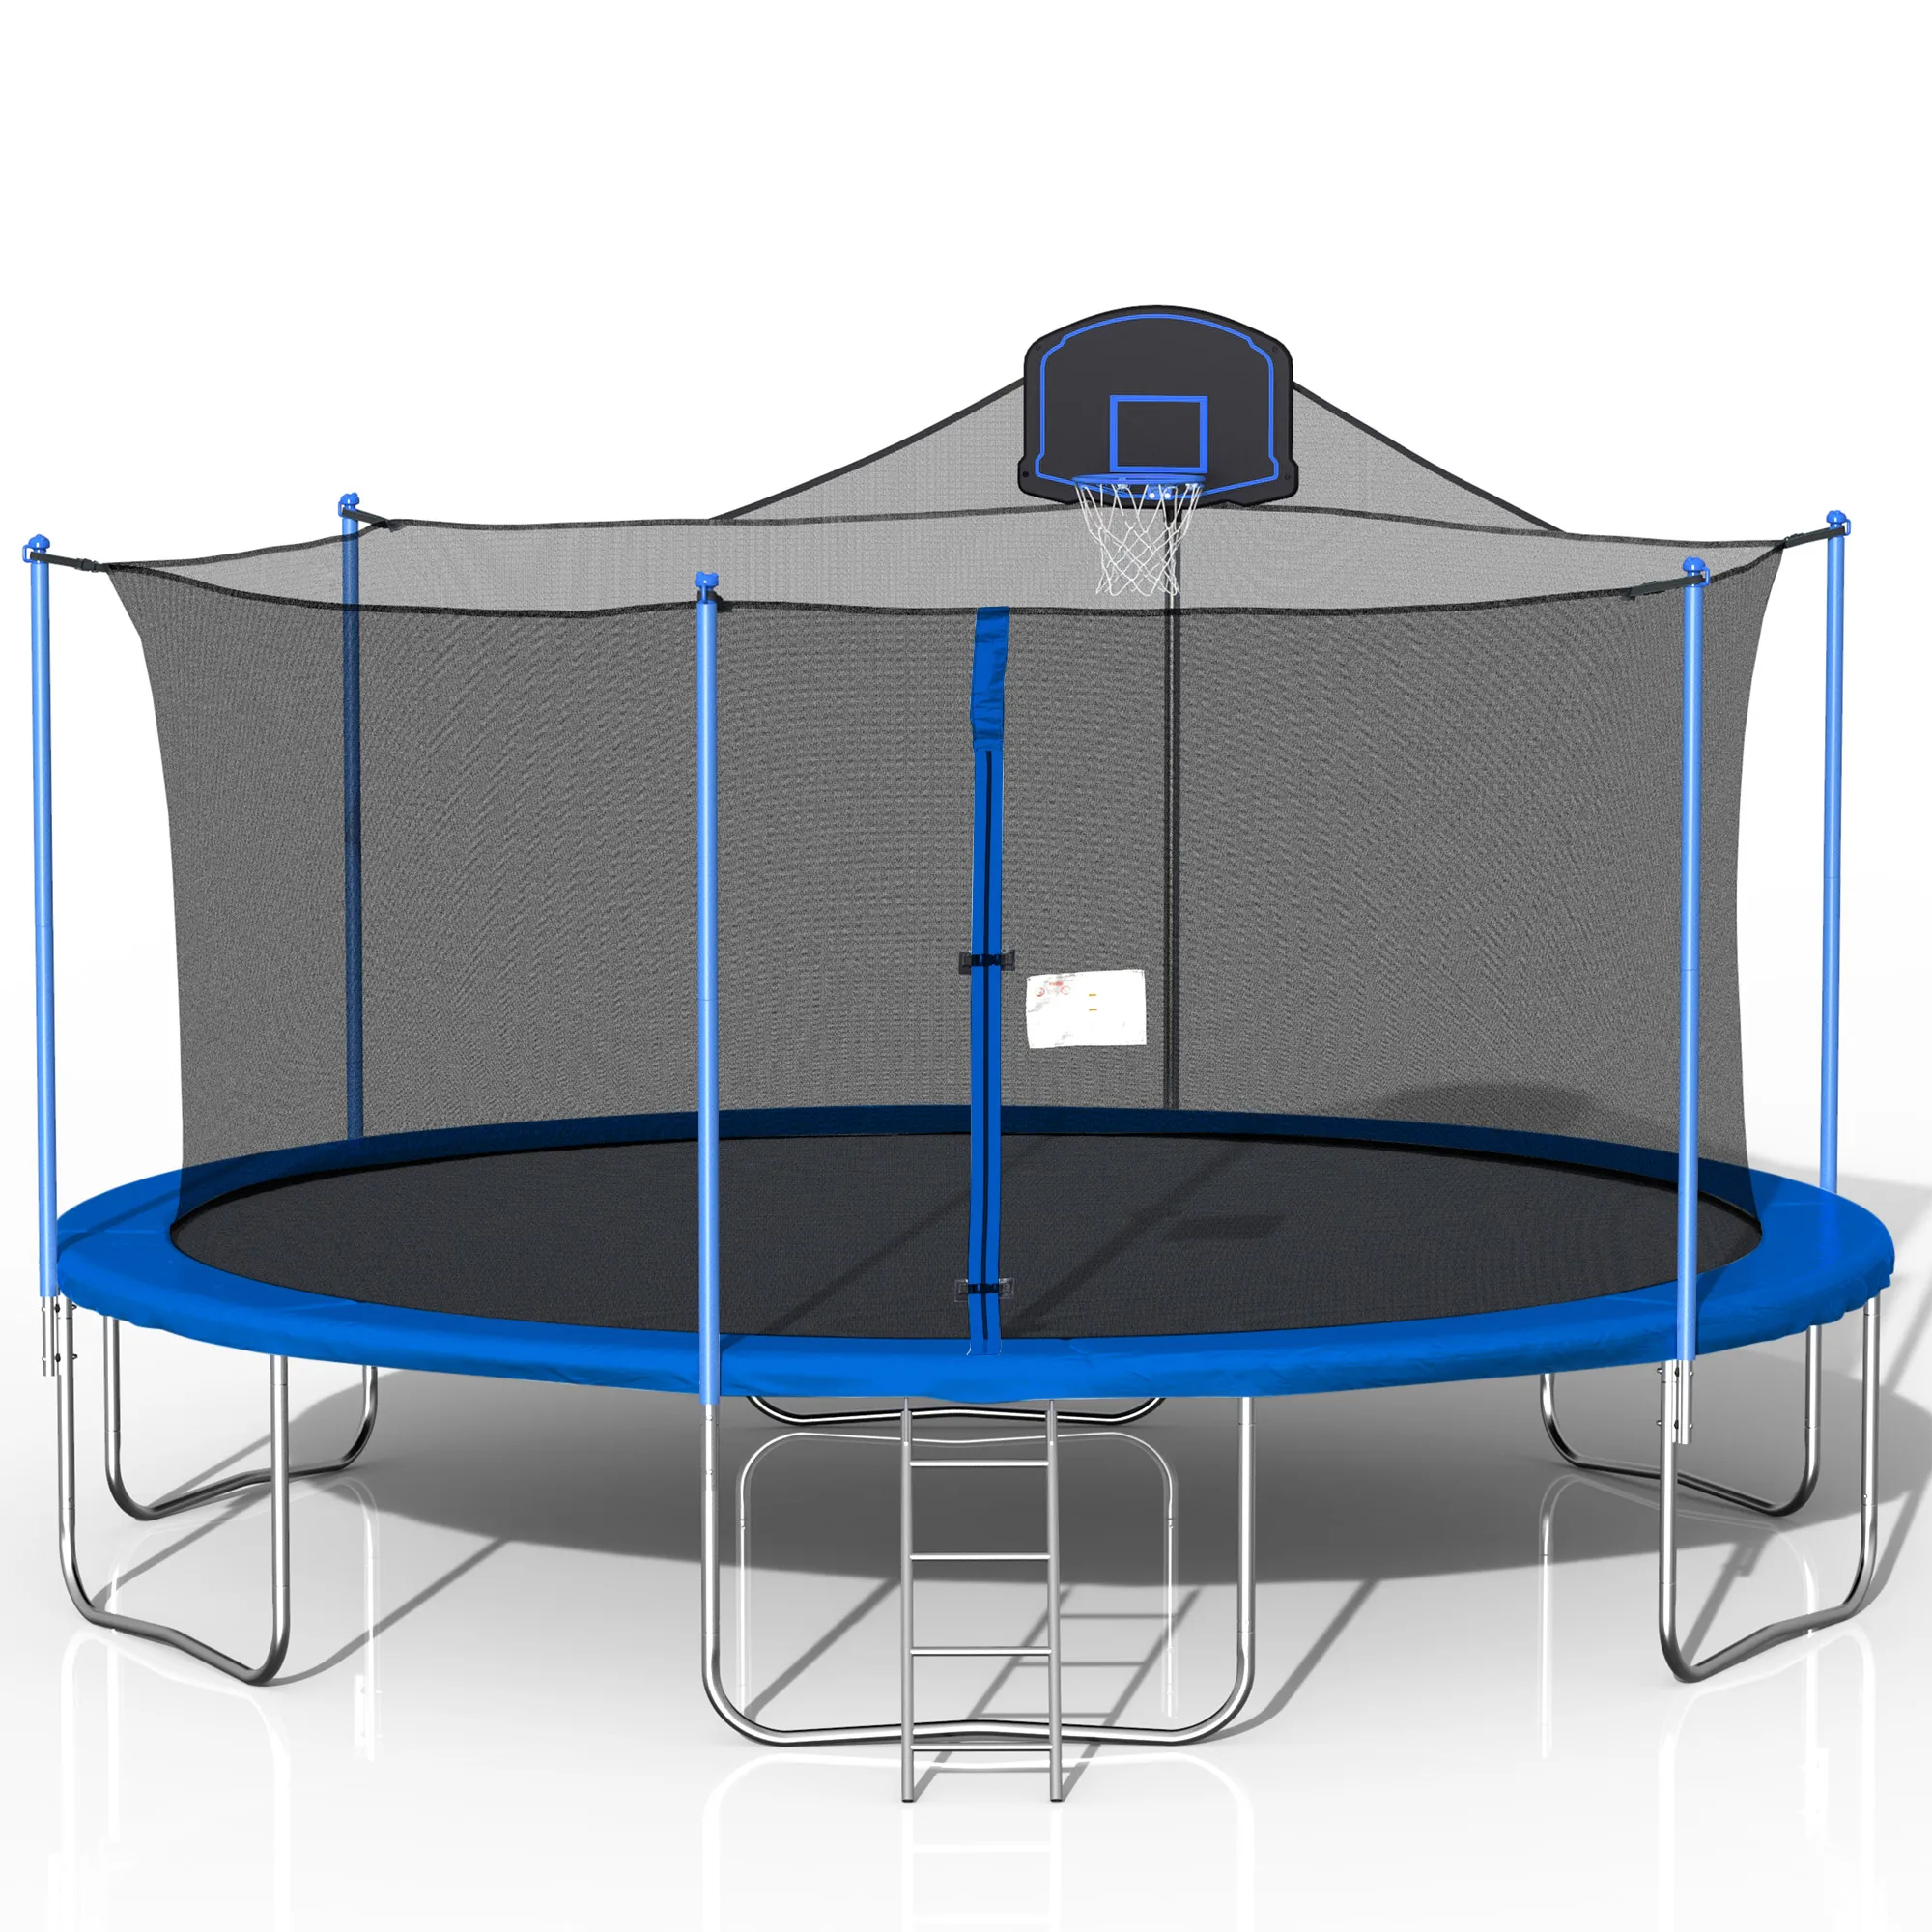 

16FT trampoline with enclosures feature and easy assemble Heavy gauge galvanized steel frame forms jumping free, Blue